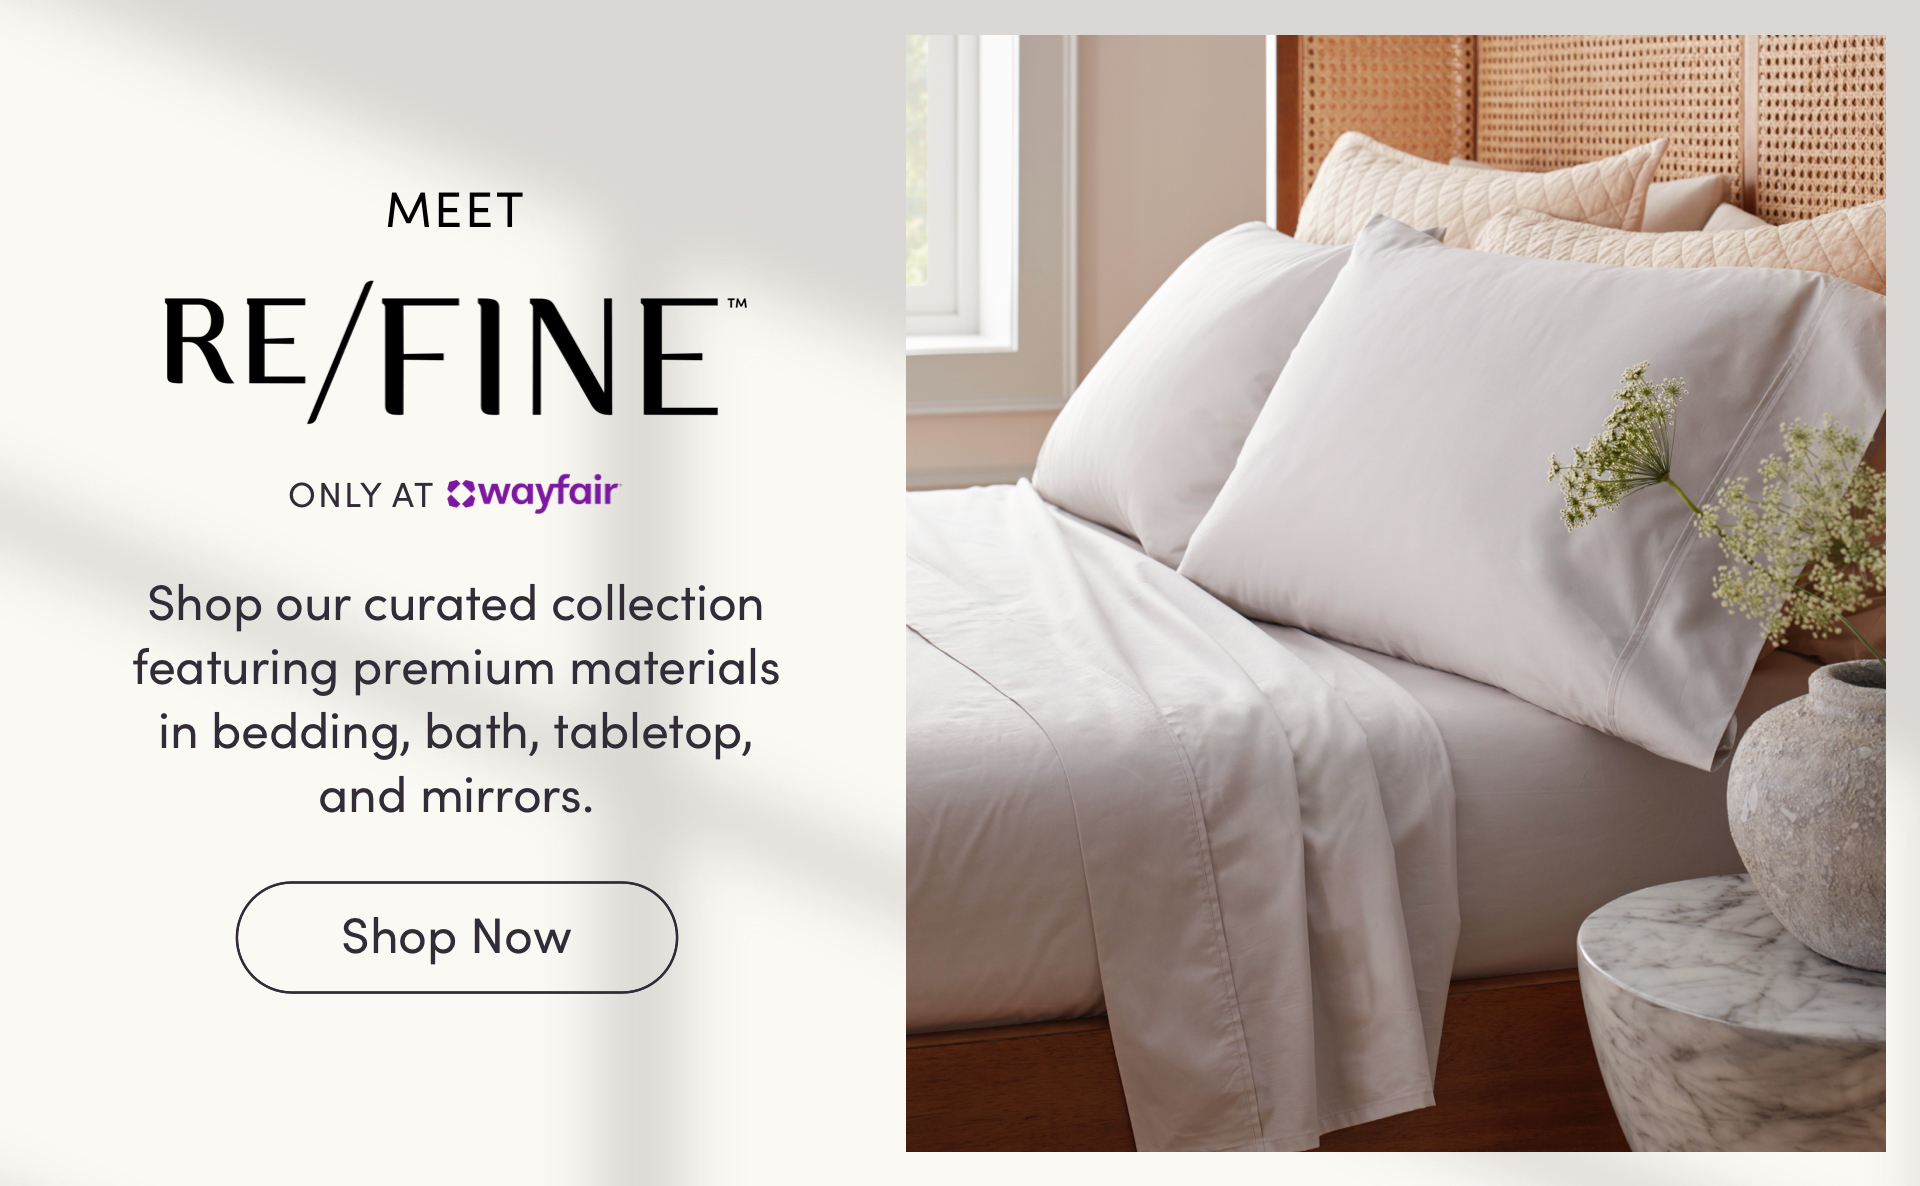 Meet Re/Fine. Only at Wayfair. Shop our curated collection featuring premium materials in bedding, bath, tabletop, and mirrors. Shop Now